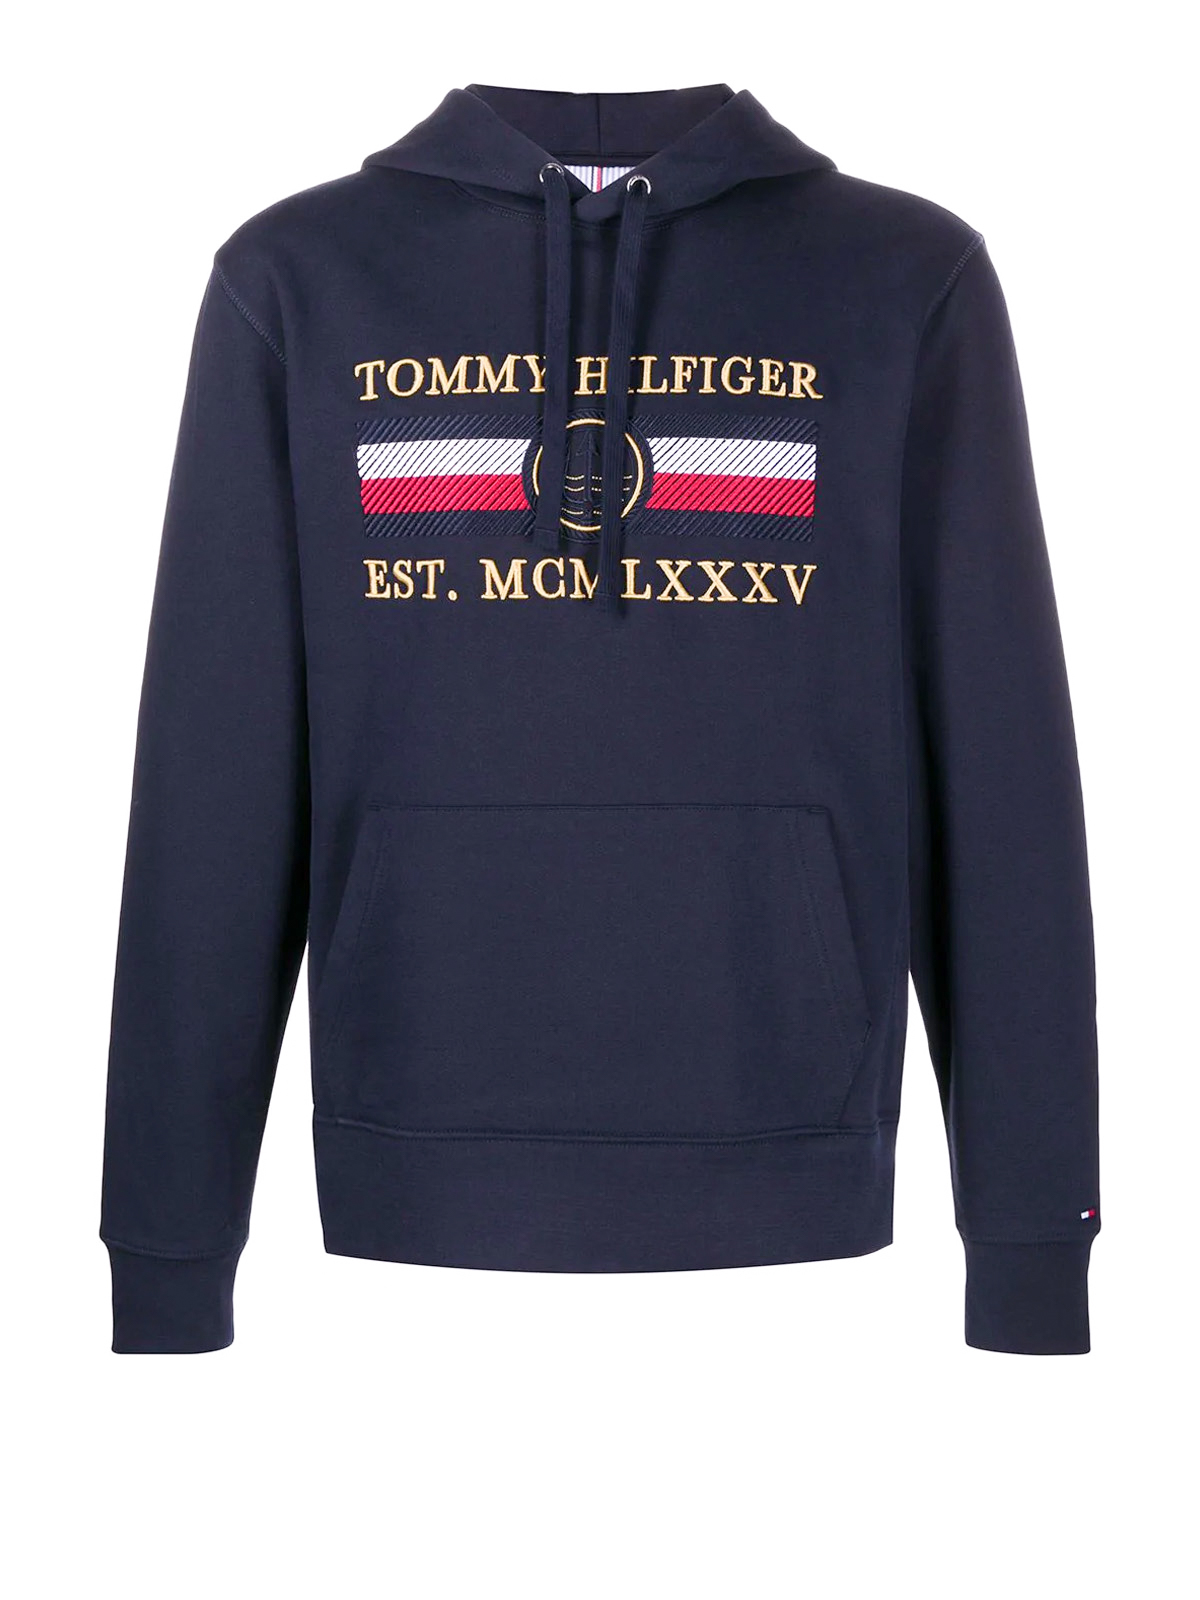 Tommy Hilfiger Men's Embroided Logo Sweater 100% Cotton 